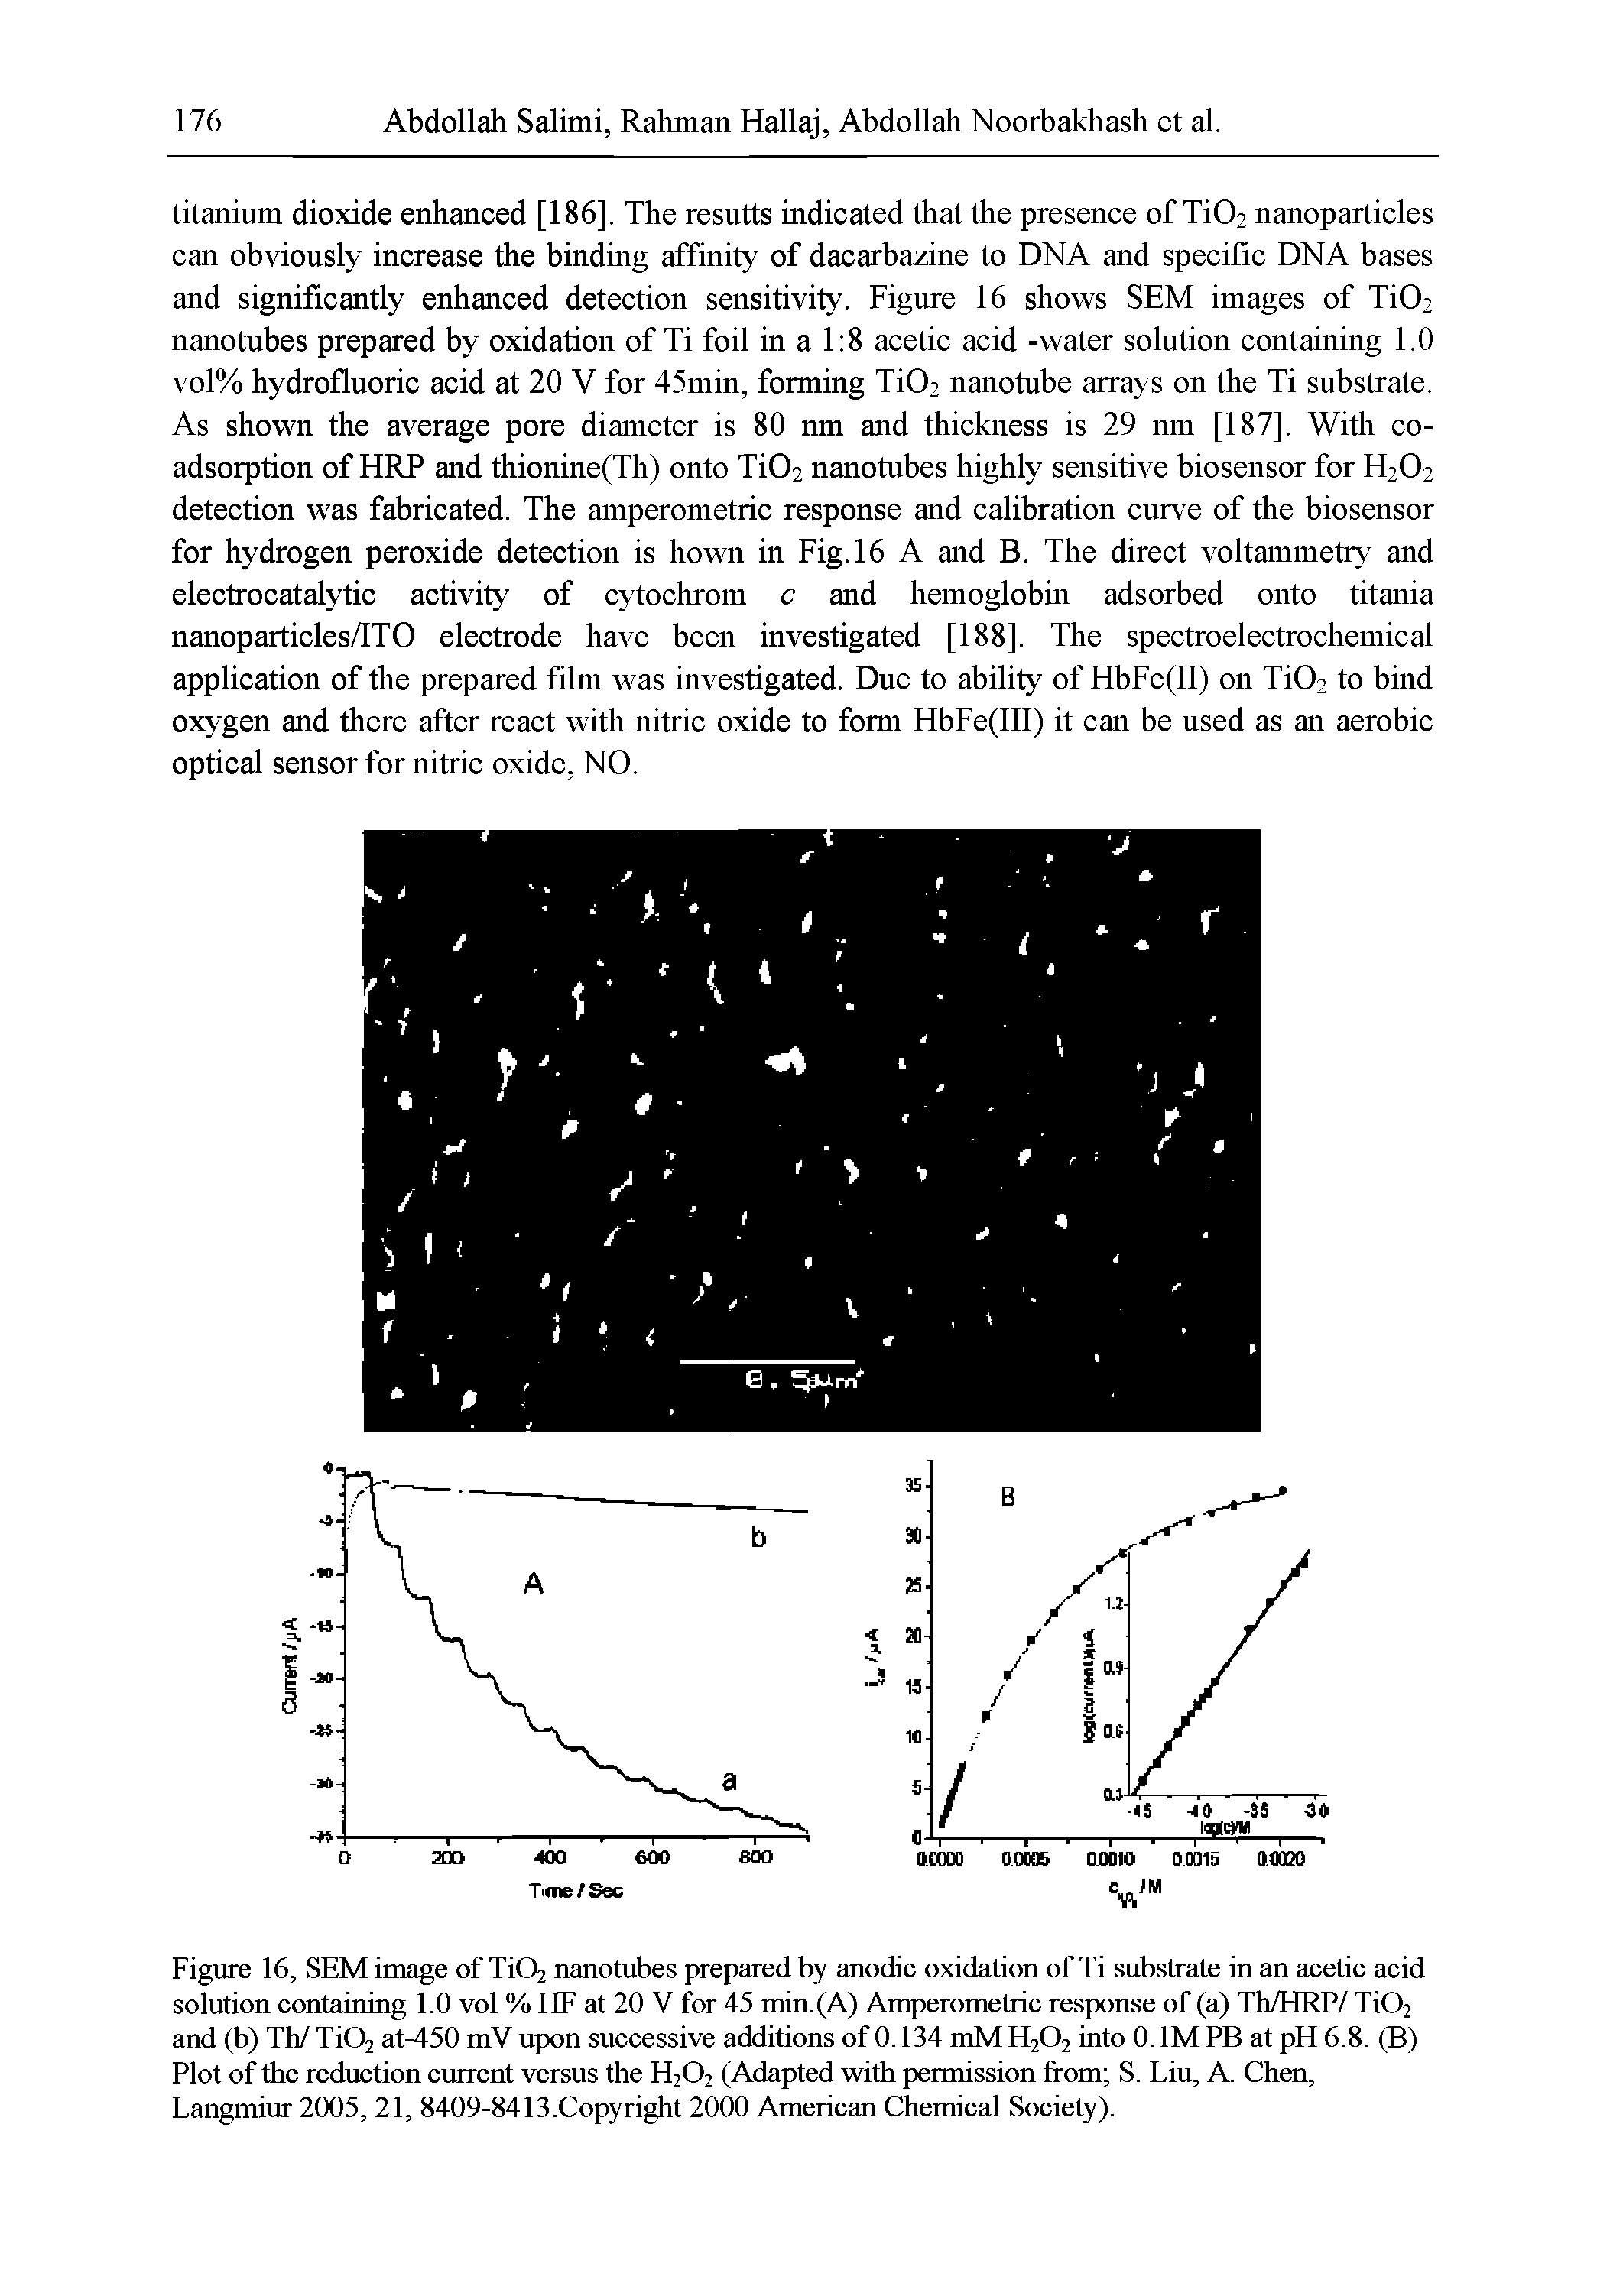 Figure 16, SEM image of Ti02 nanotubes prepared by anodic oxidation of Ti substrate in an acetic acid solution containing 1.0 vol % HF at 20 V for 45 min.(A) Amperometric response of (a) Th/HRP/ Ti02 and (b) Th/ Ti02 at-450 mV upon successive additions of 0.134 mM H202 into 0.1M PB at pH 6.8. (B) Plot of the reduction current versus the H202 (Adapted with permission from S. Liu, A. Chen, Langmiur 2005, 21, 8409-8413.Copy right 2000 American Chemical Society).